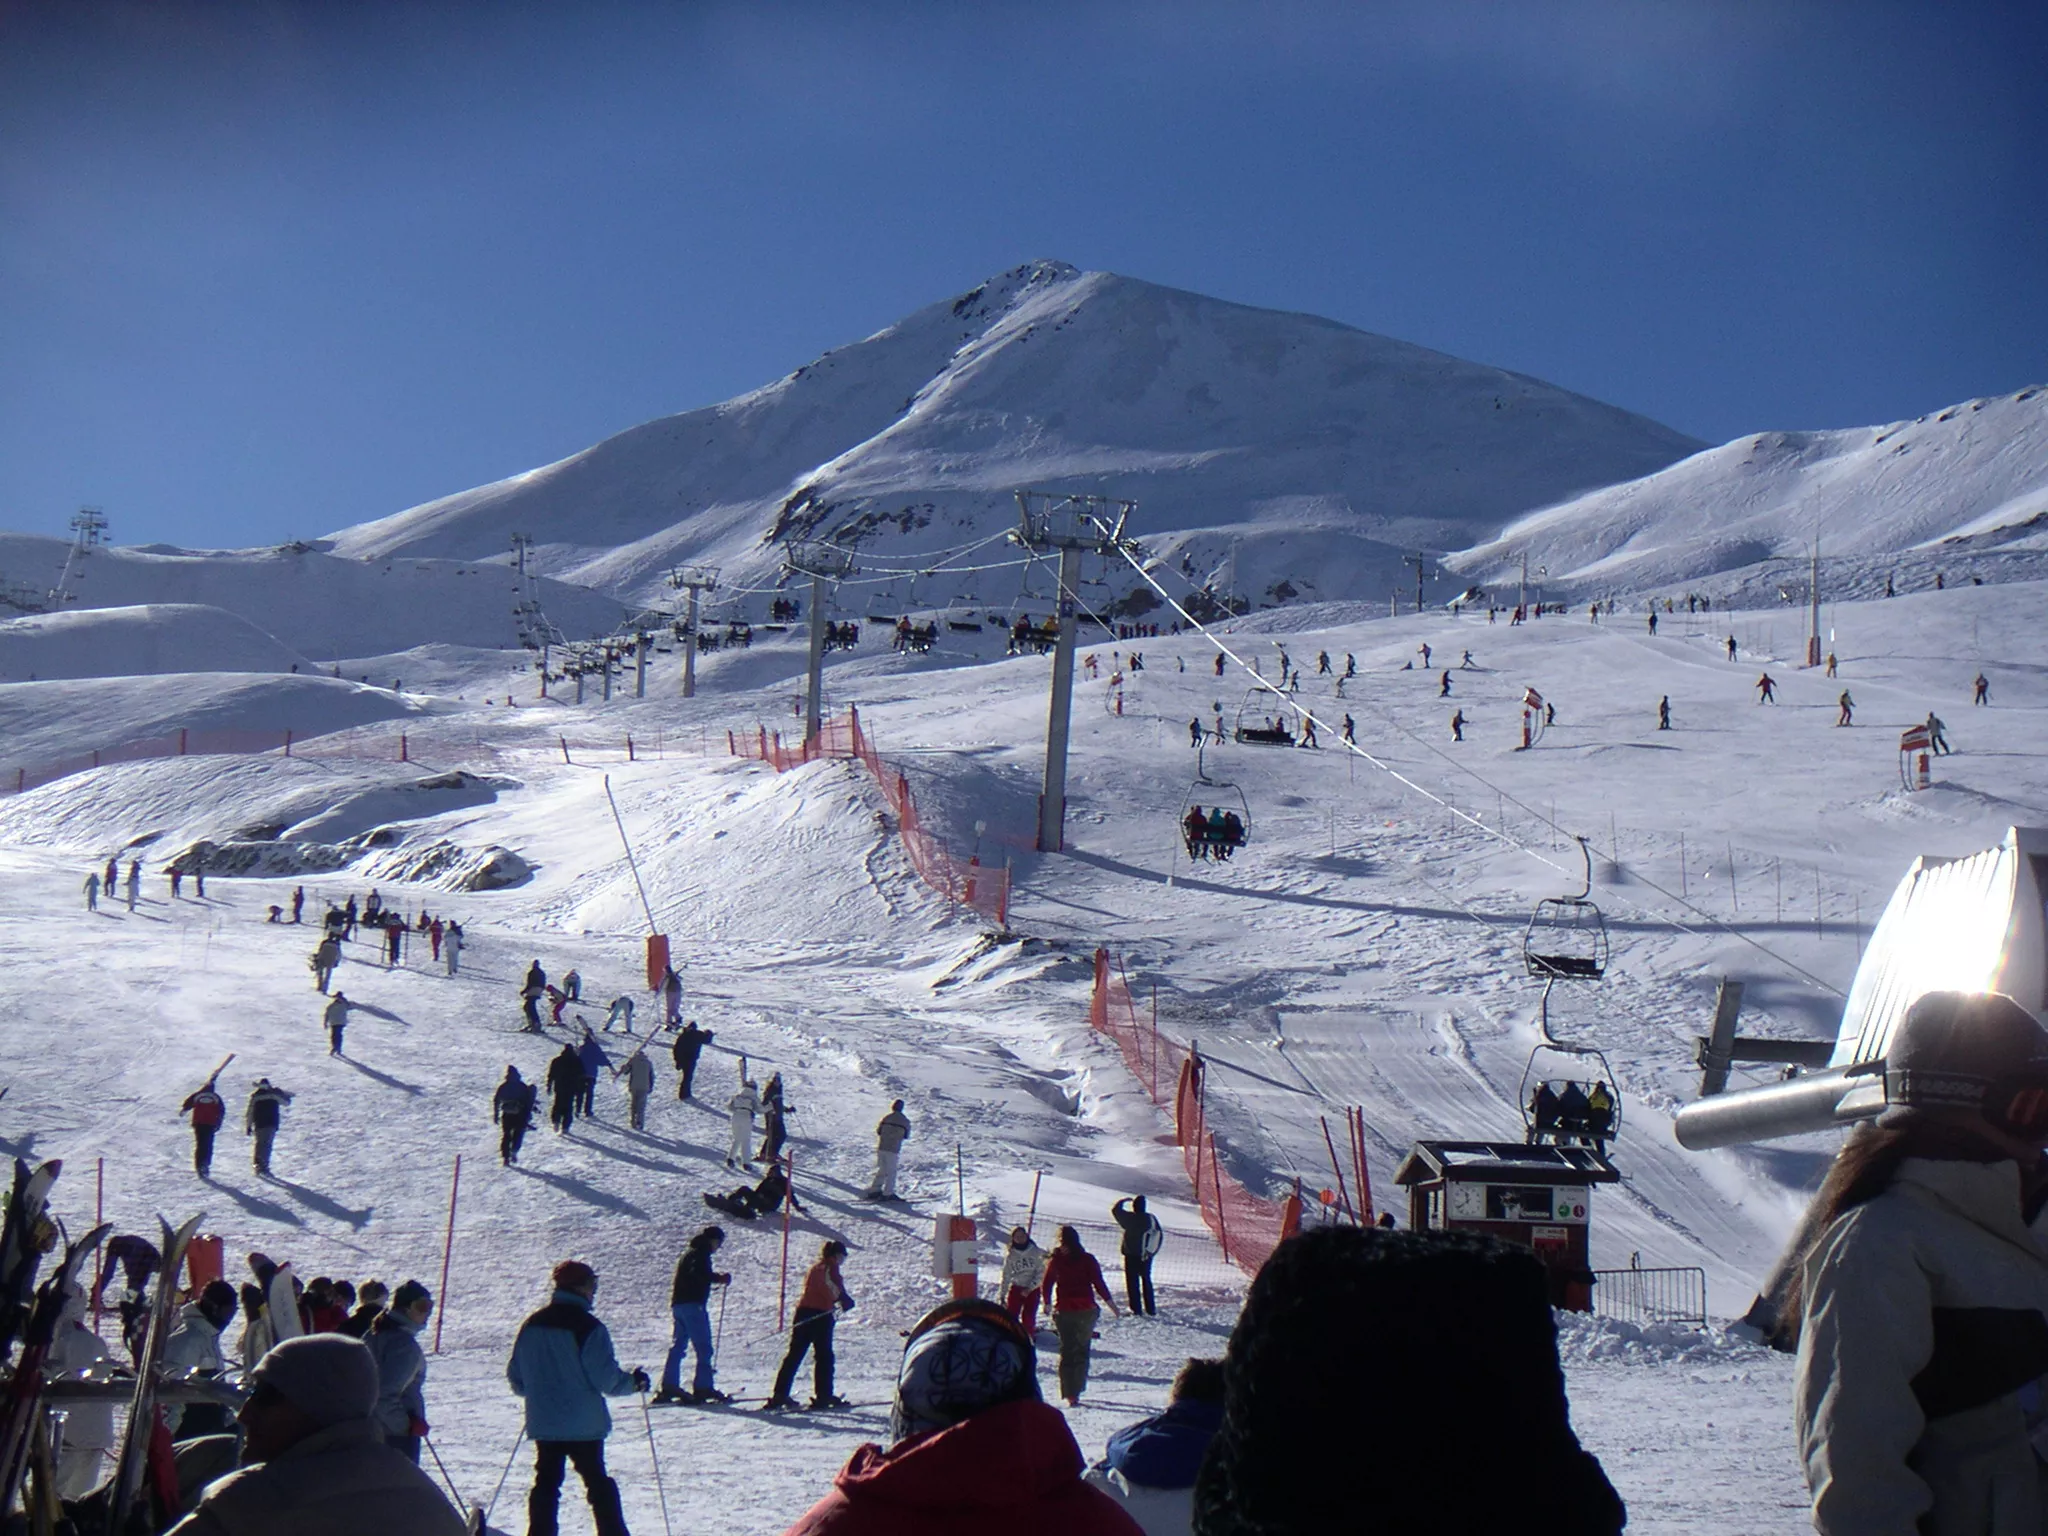 Boi-Taul in Spain, Europe | Snowboarding,Skiing - Rated 3.5